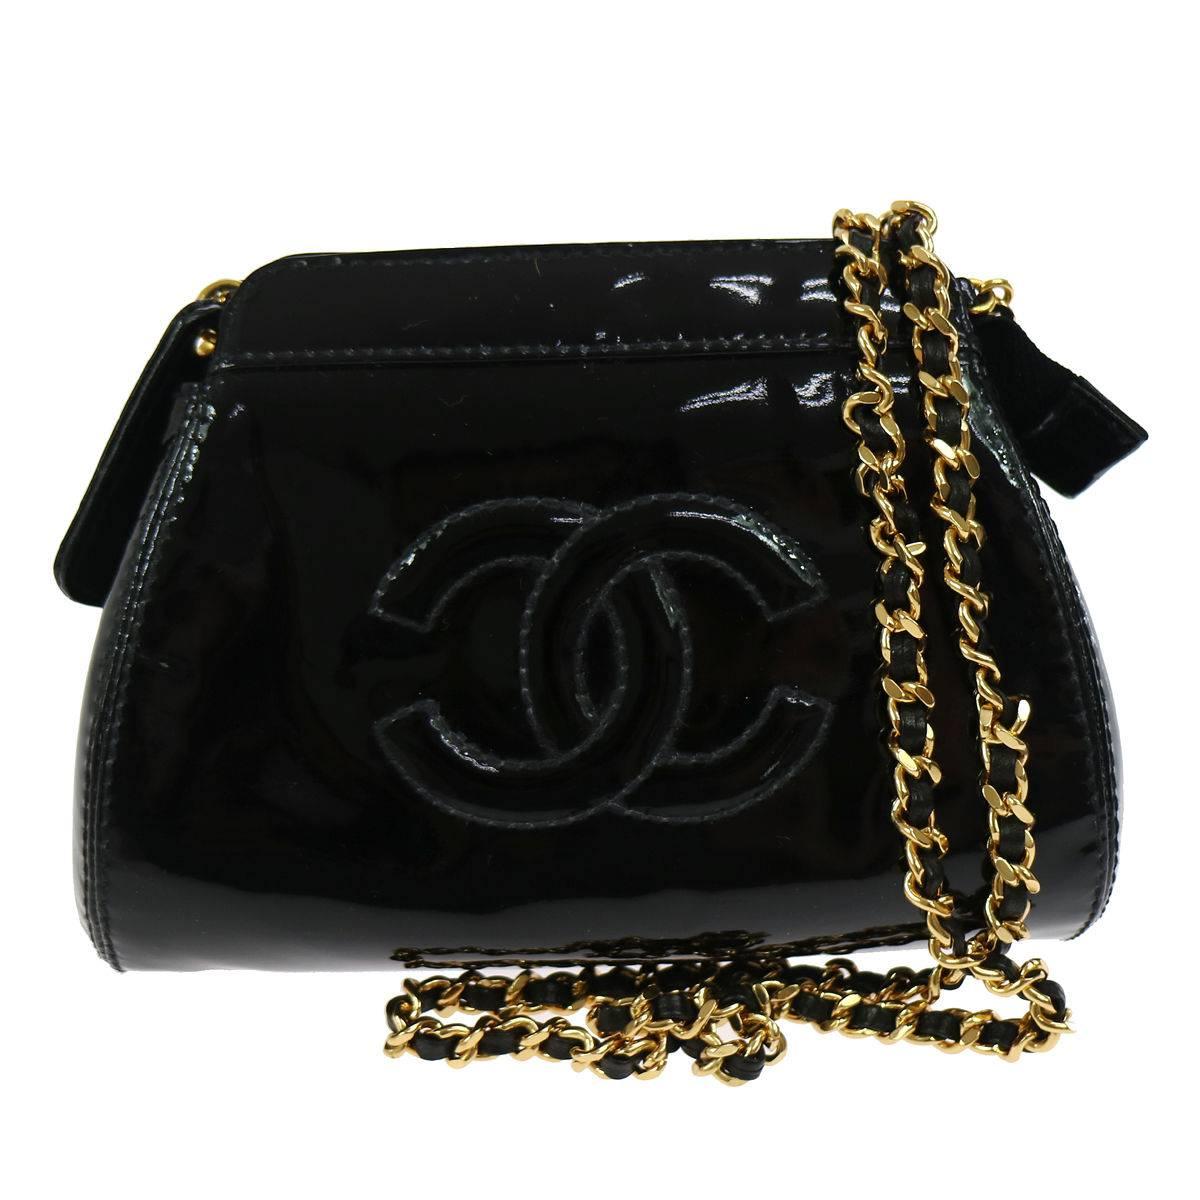 Chanel Black Patent Leather Party Crossbody Shoulder Bag W/Box